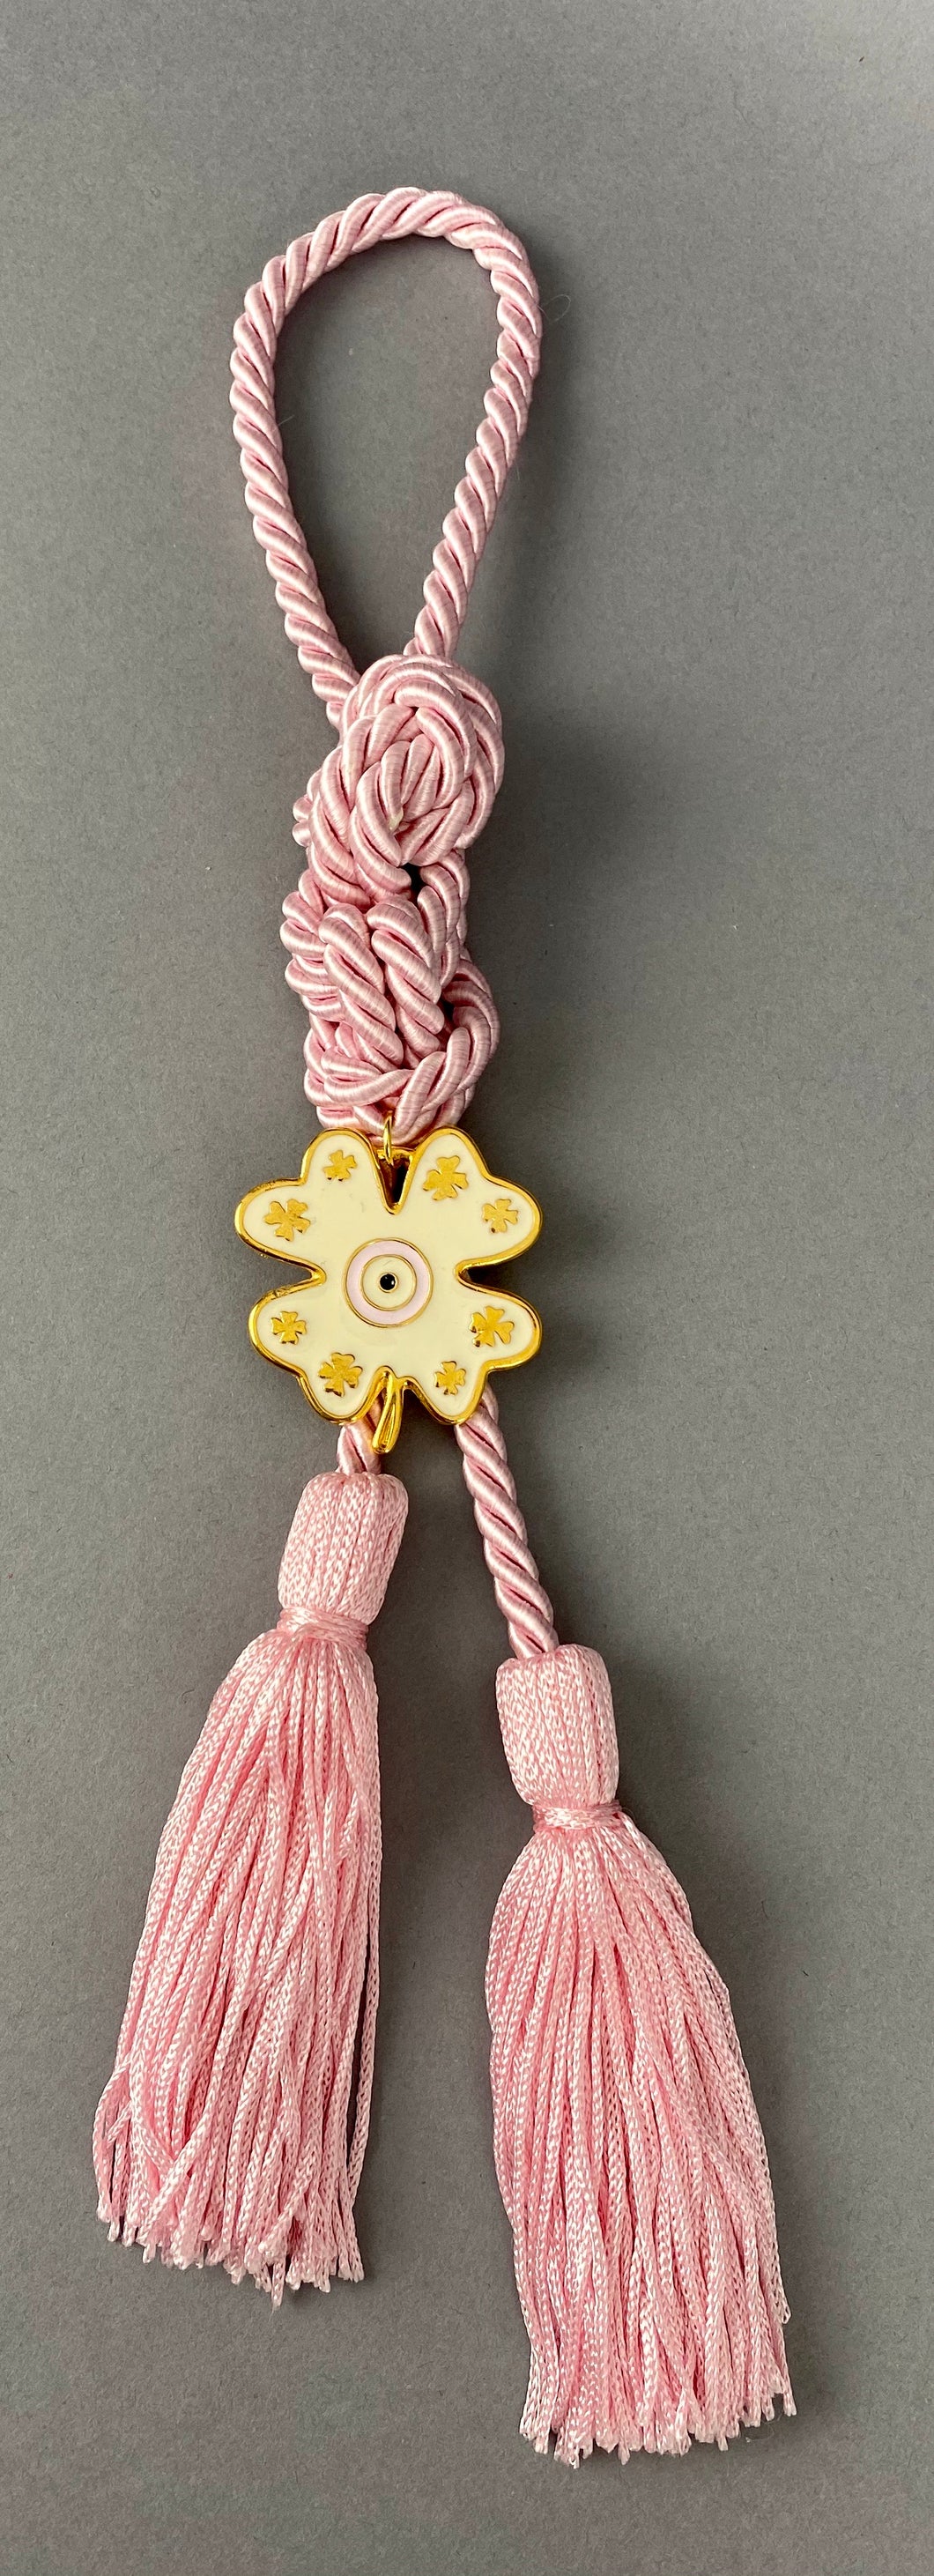 Gouri 1023 Pearl Pink  Cord Gouri, metal 4 leaf clover with Mati and double tassel.   Measures 13” in length.